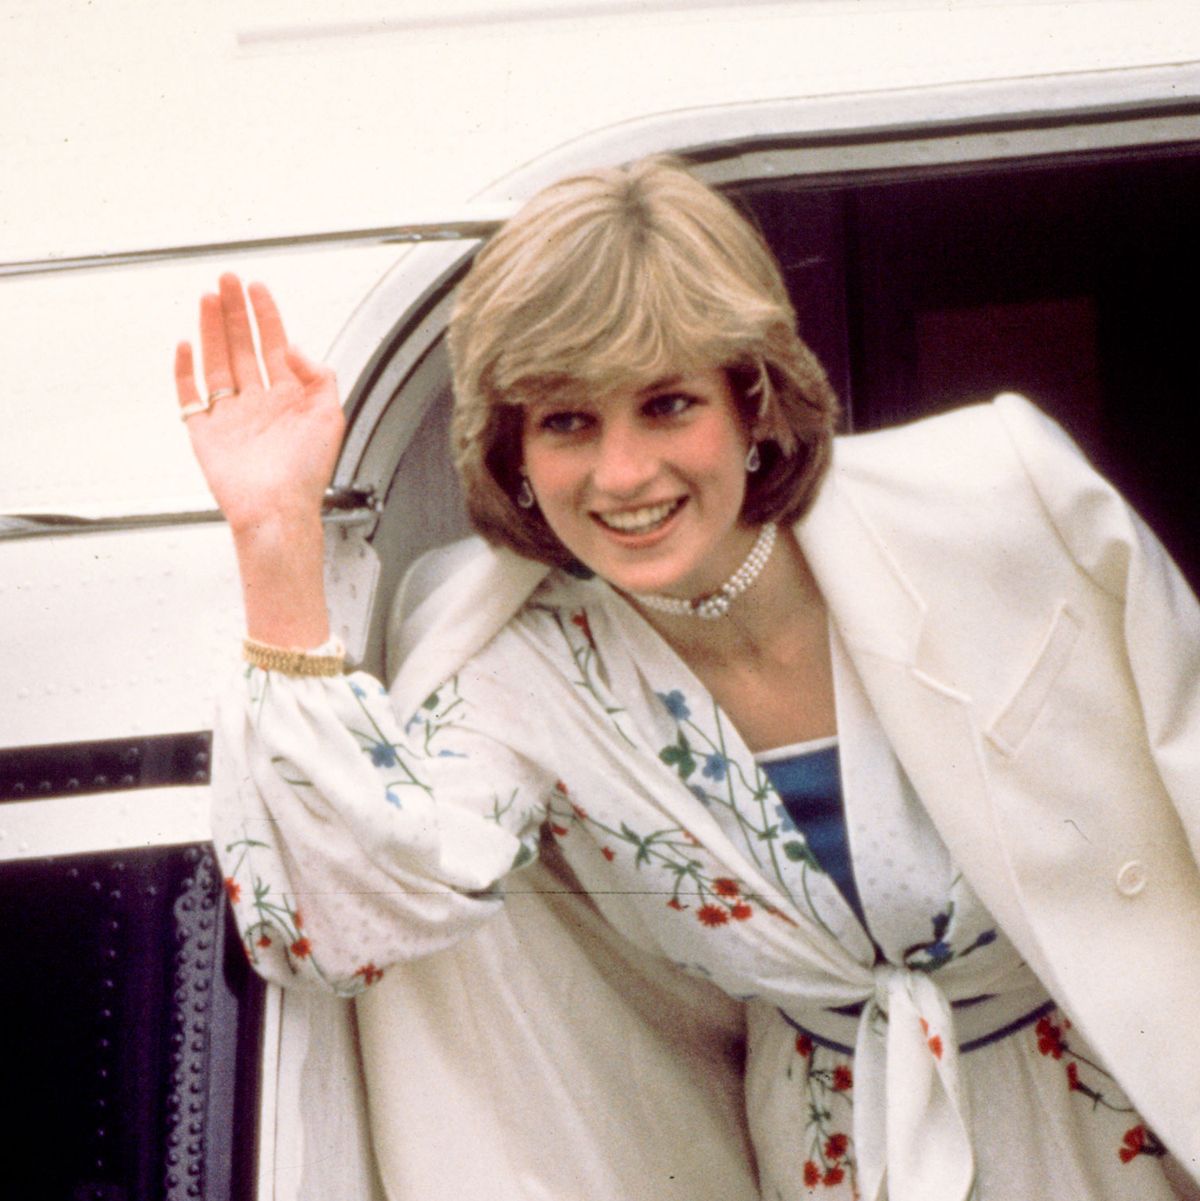 Princess Diana's Best Fashion Moments of All Time